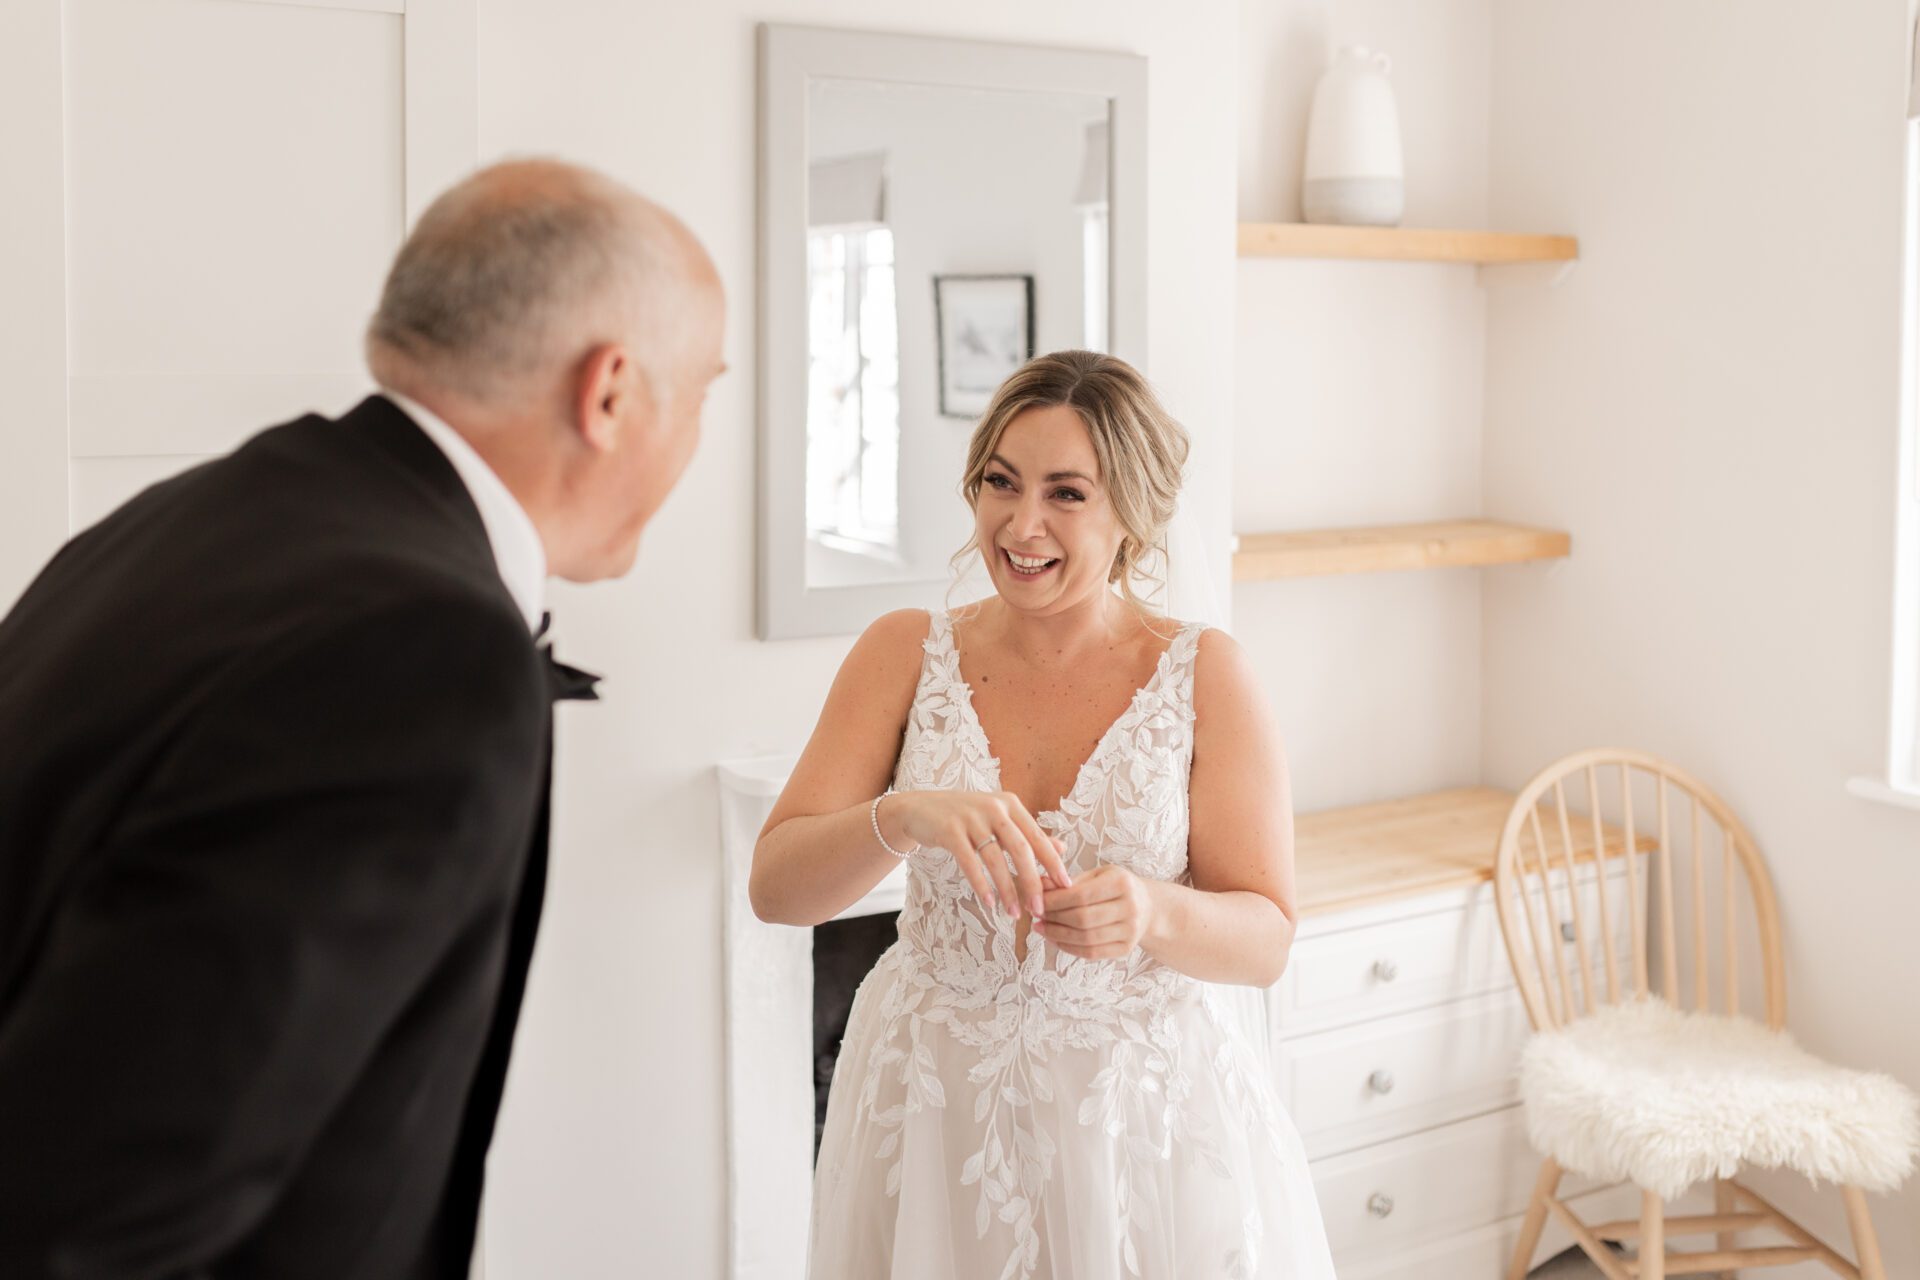 The bride and her father share a special moment